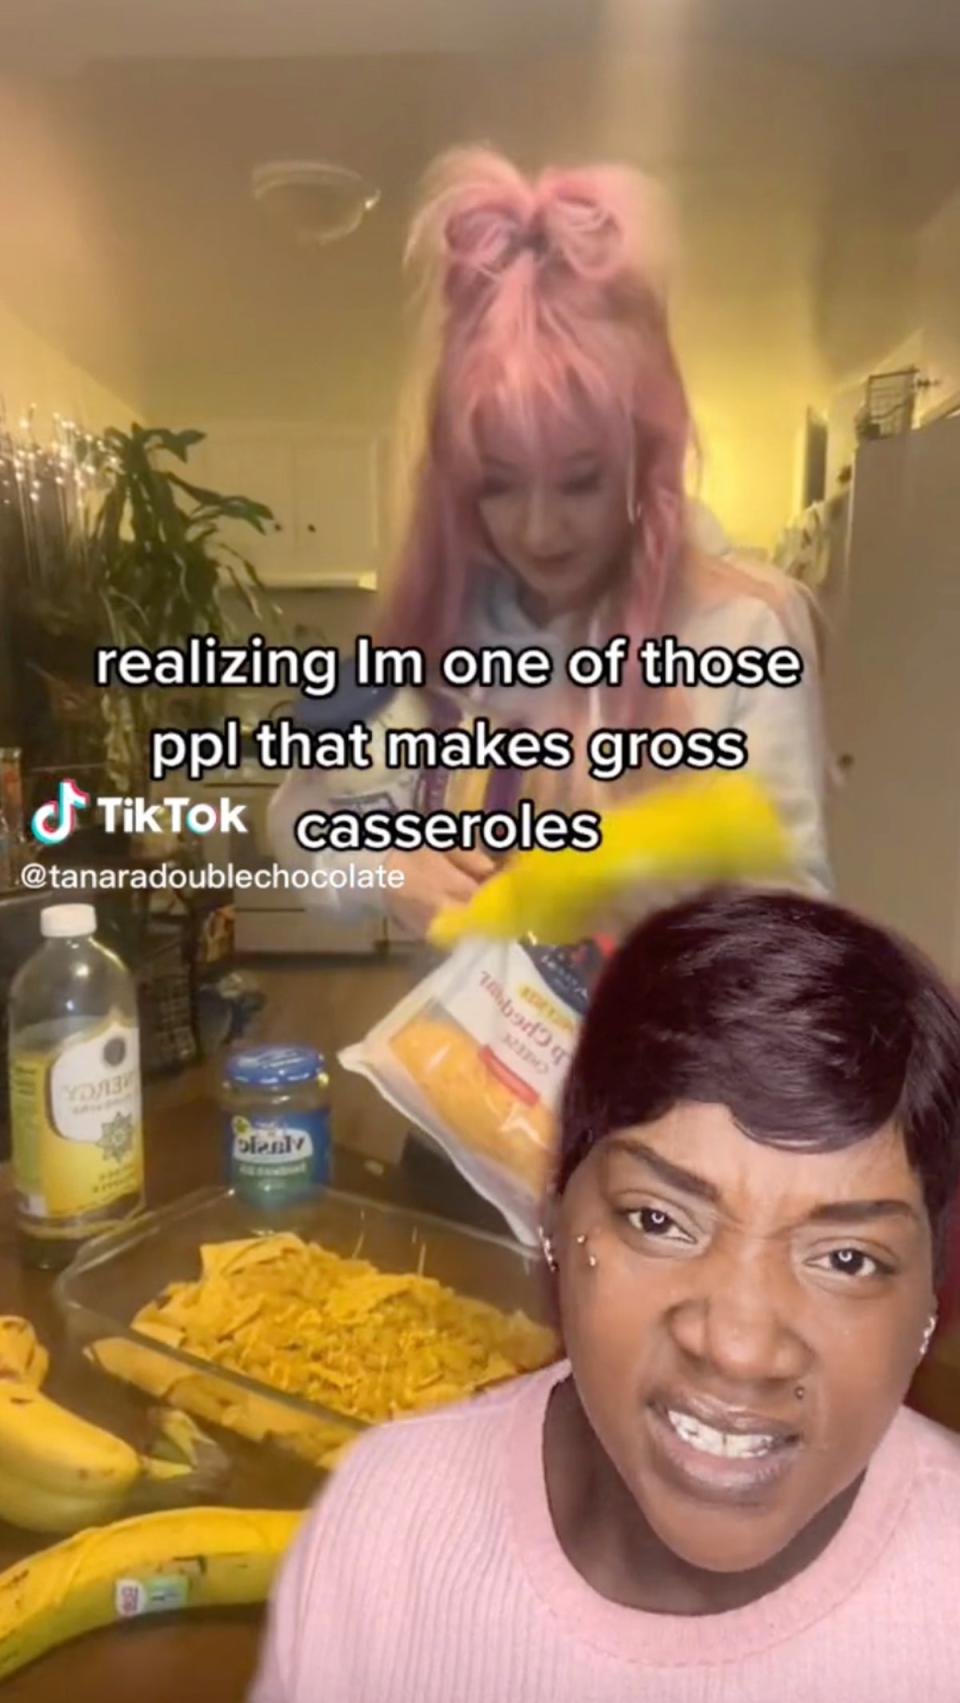 Tanaradoublechocolate, who digs up the most egregious and astounding examples of the app's culinary wizardry (TikTok/Tanaradoublechocolate)